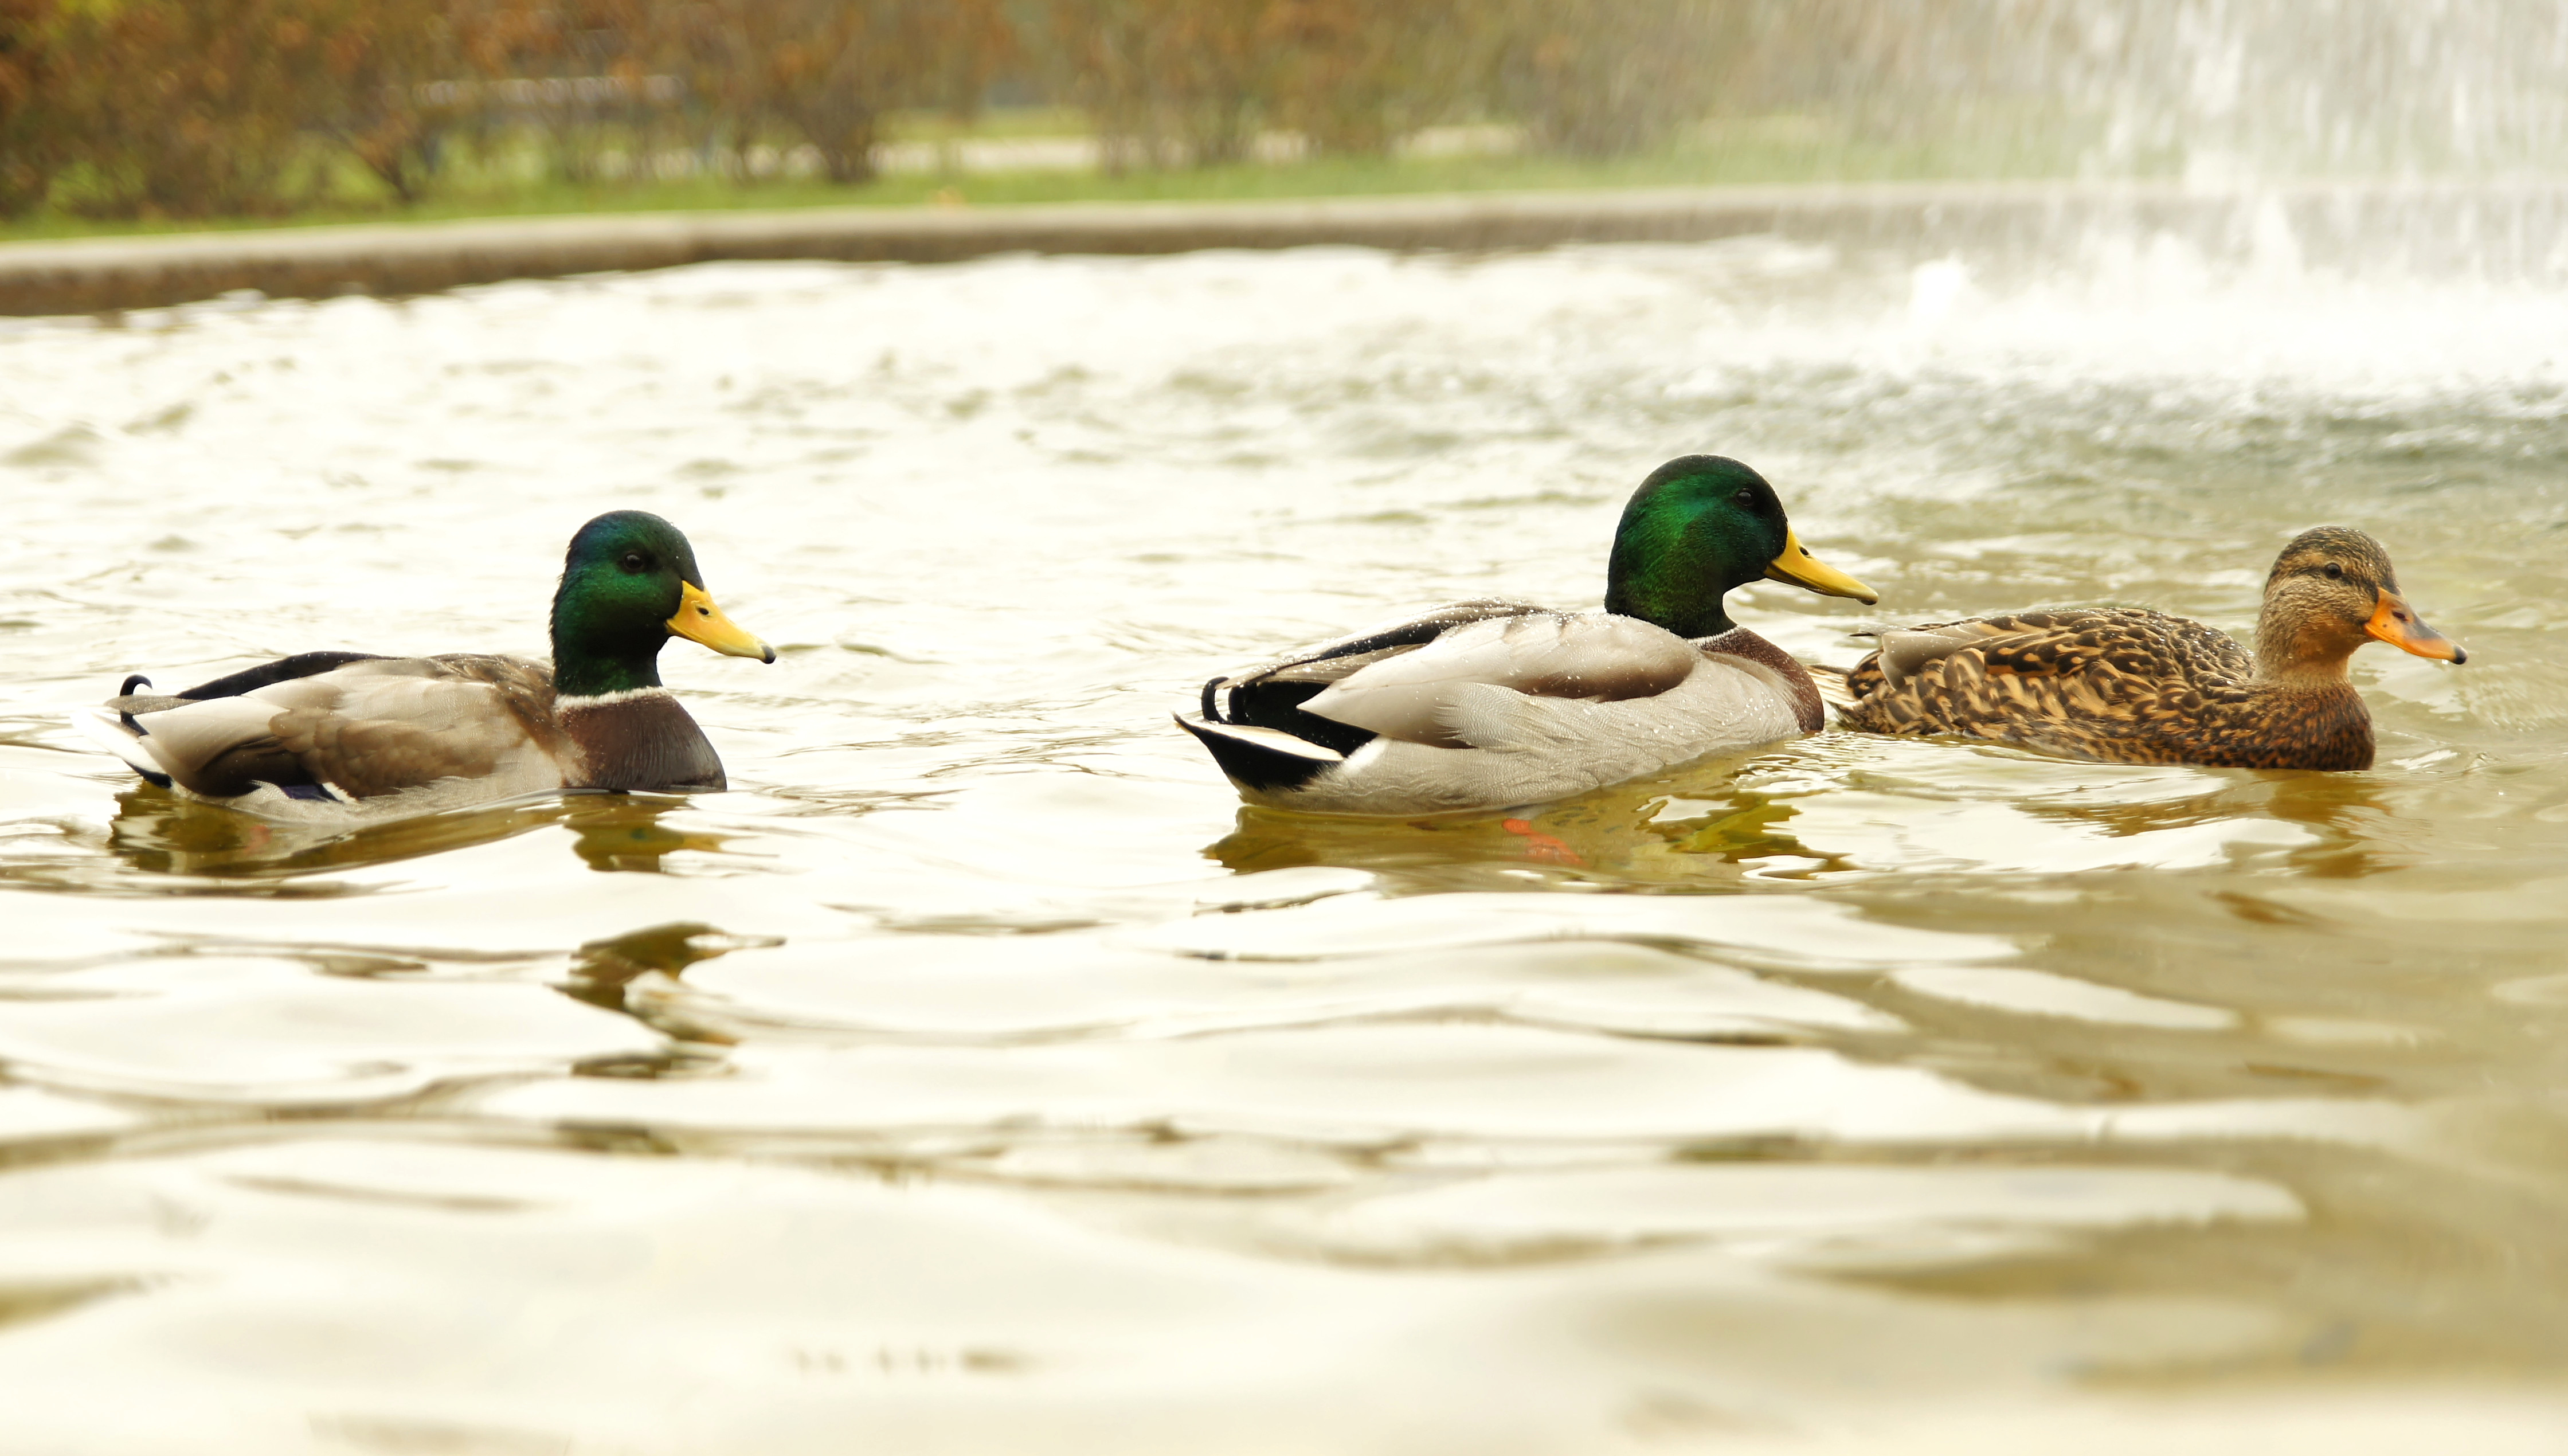 Three wild ducks at water - Our Great Photos